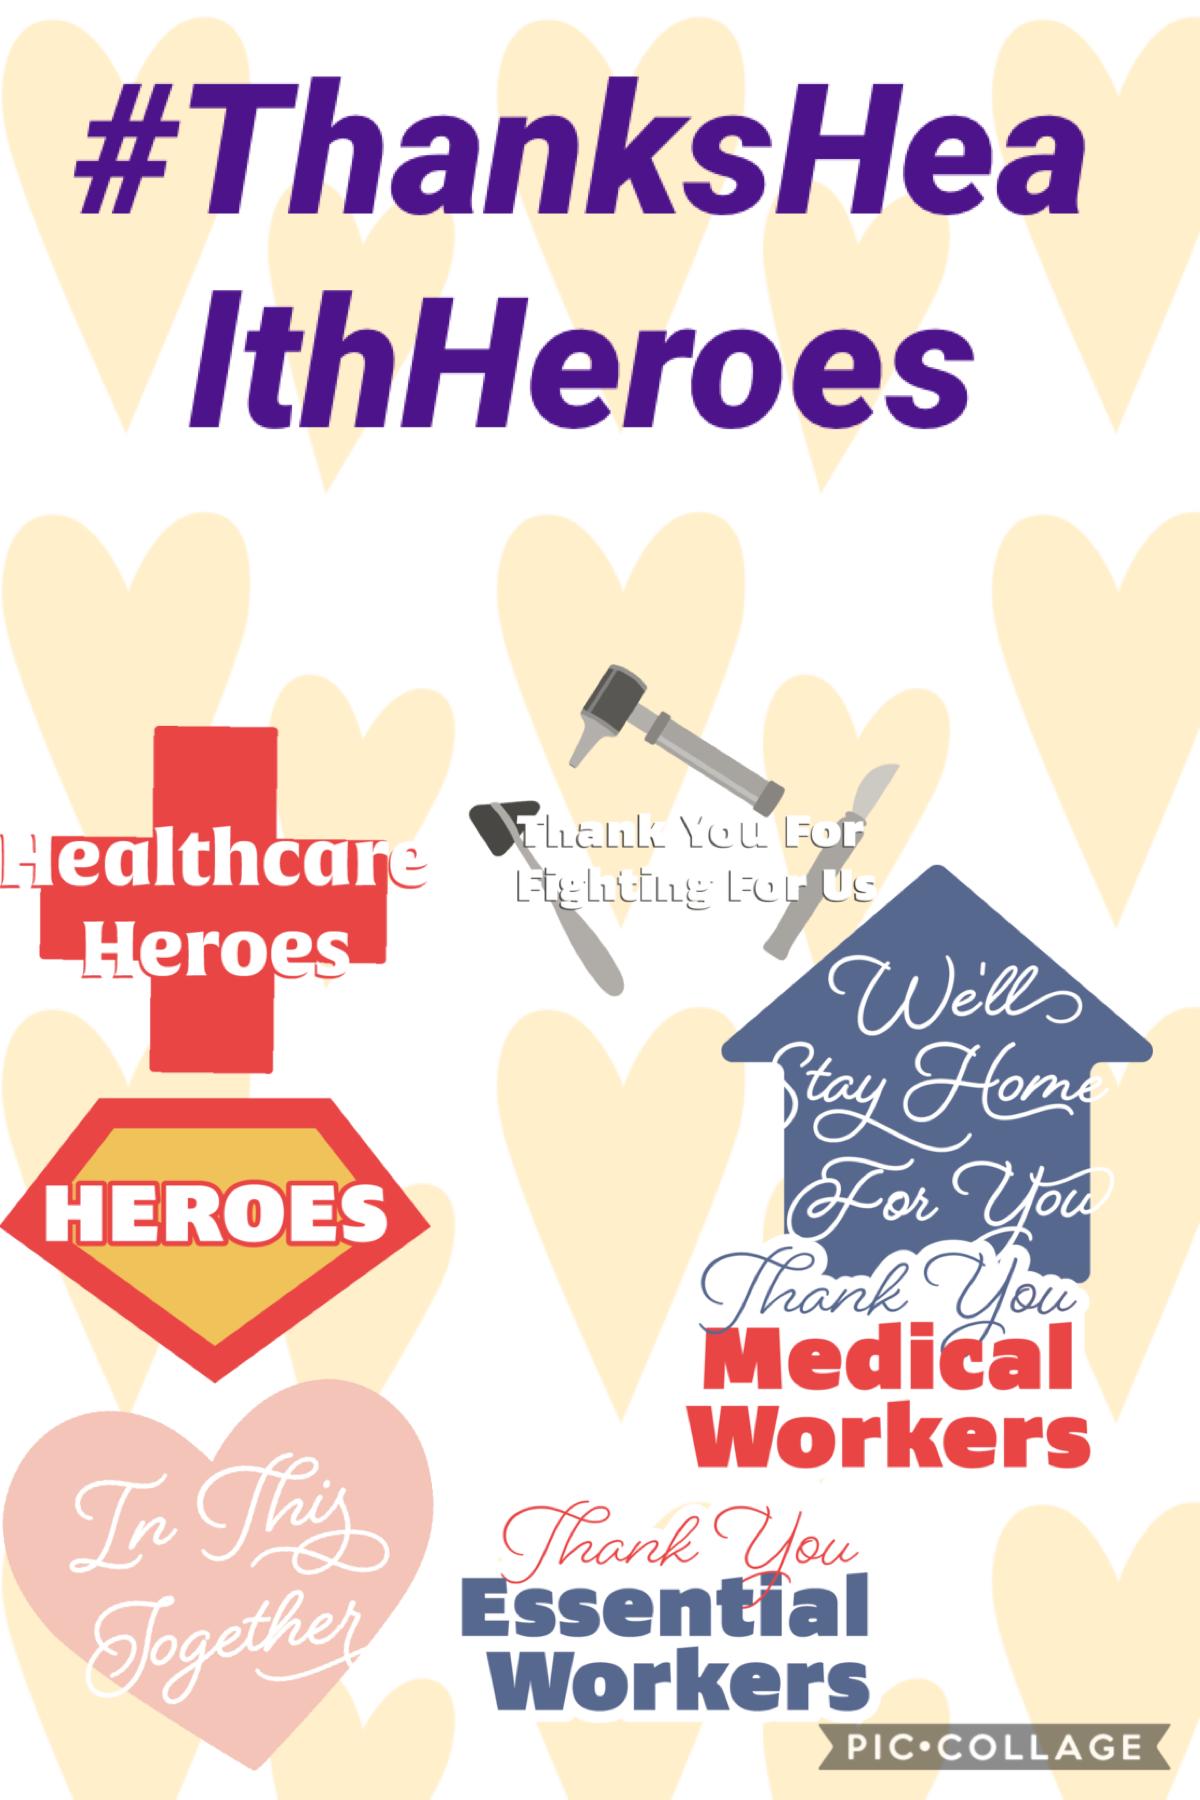 #ThanksHealthheroes for helping us in the fight against coronavirus!